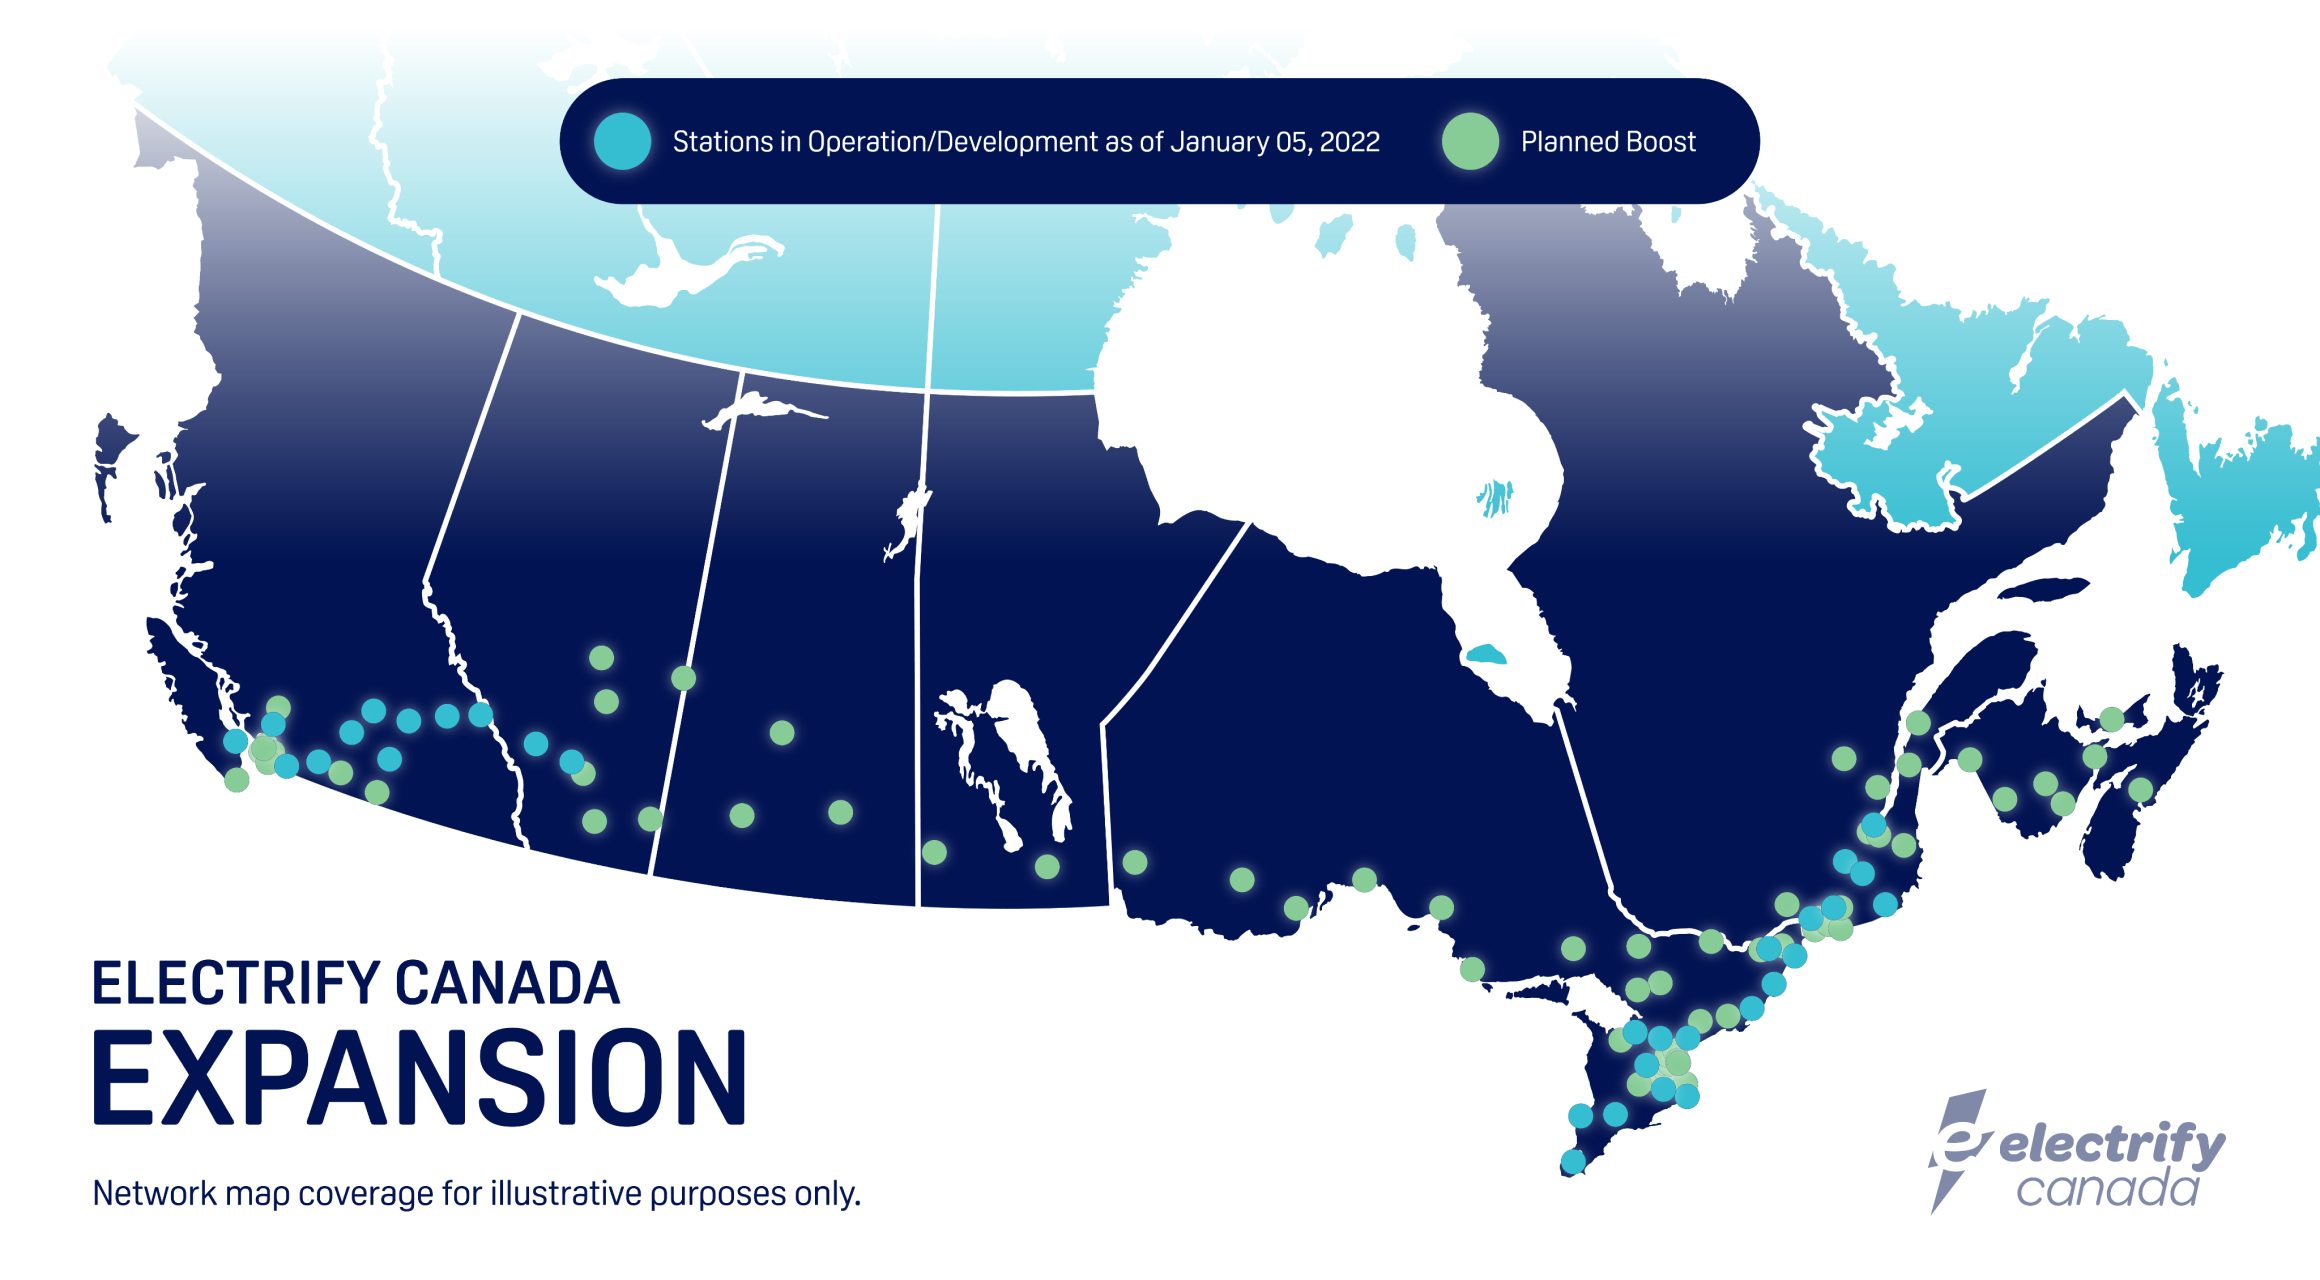 Electrify Canada Expansion network map coverage for illustrative purposes only.